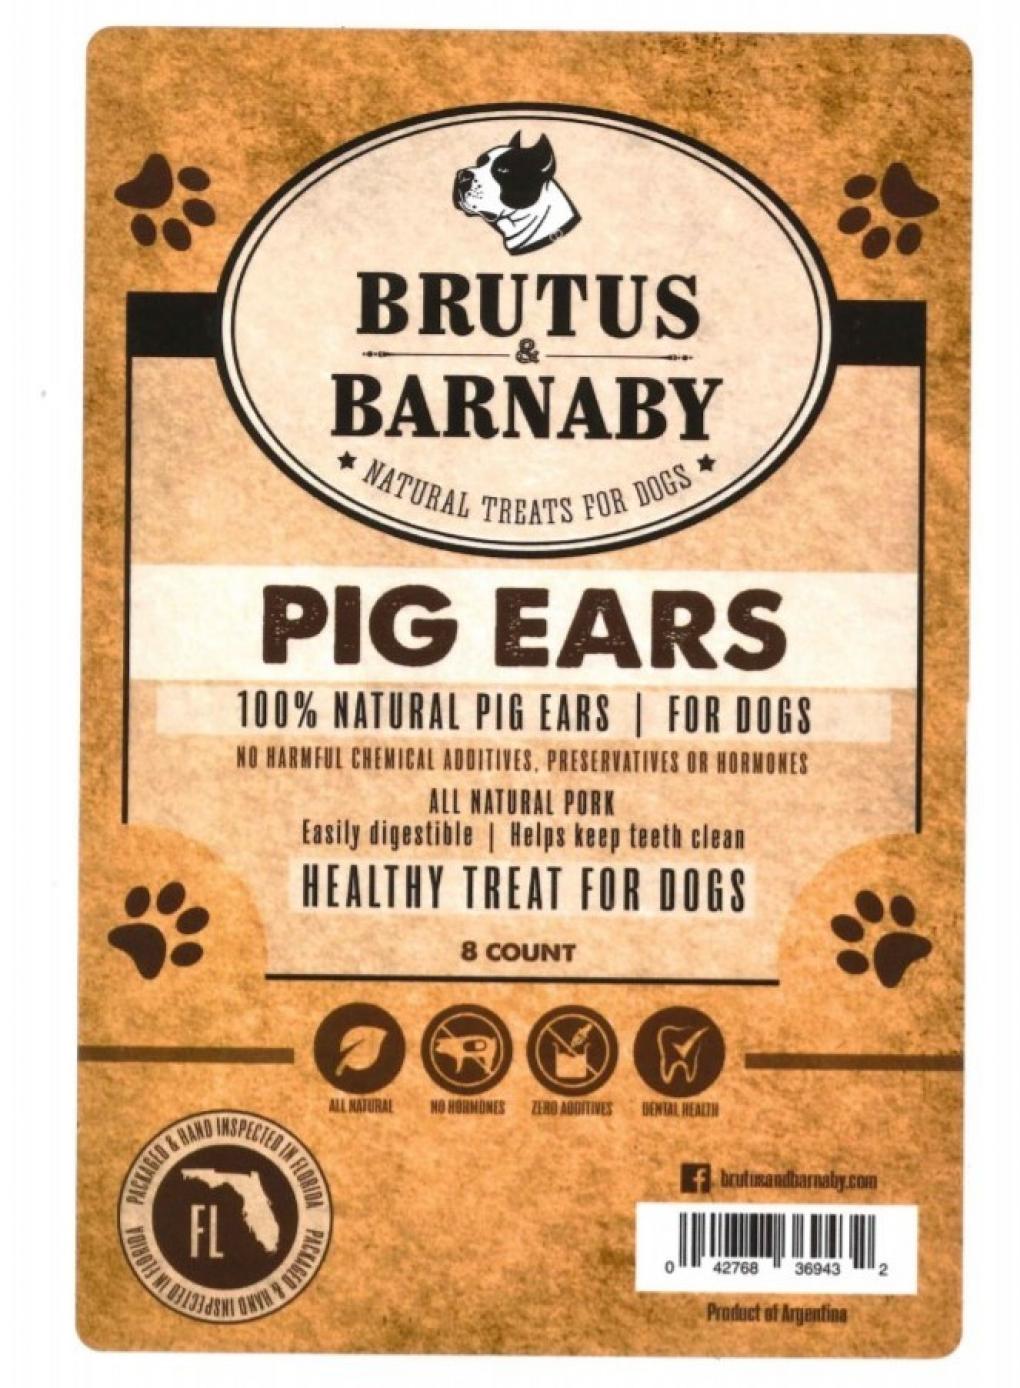 Brutus & Barnaby recalled  “Pig Ears Natural Treats for Dogs”  due to salmonella